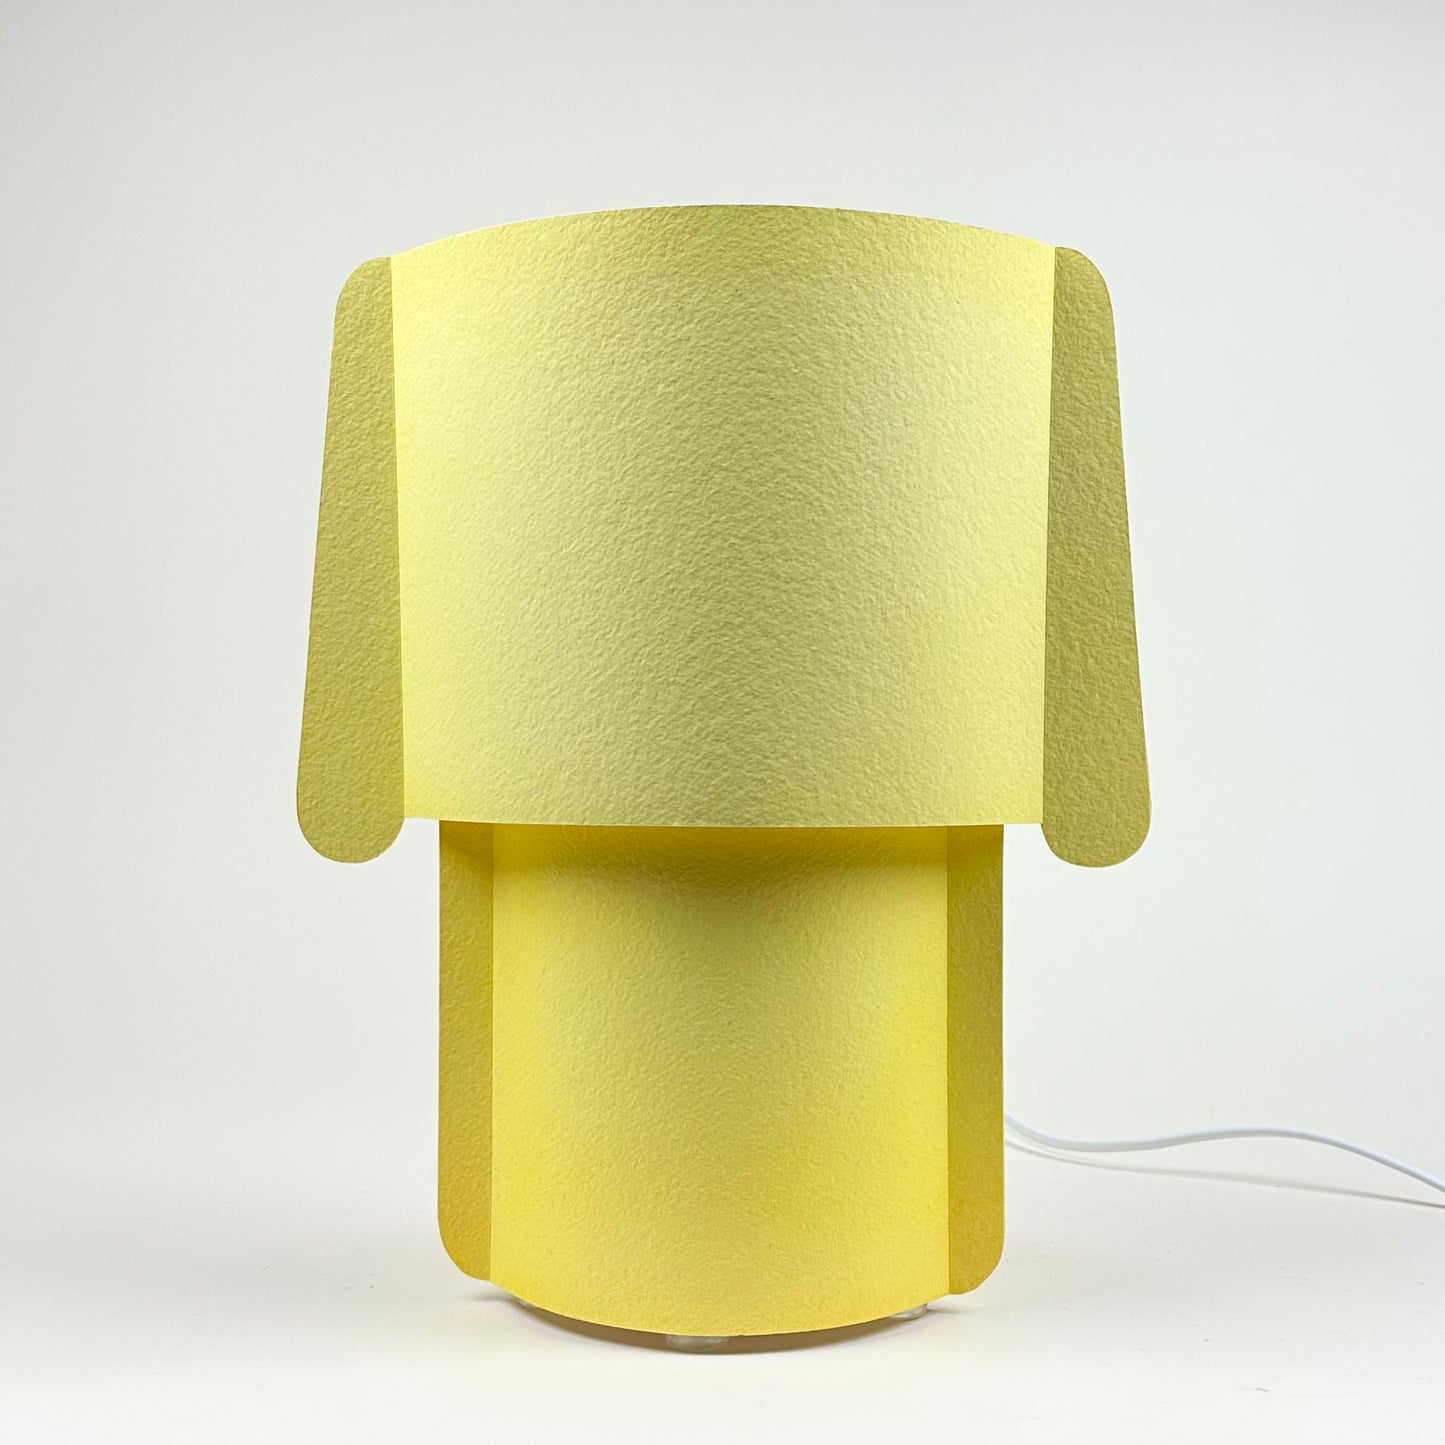 Aquarelle paper lamp by Adrian Bursell